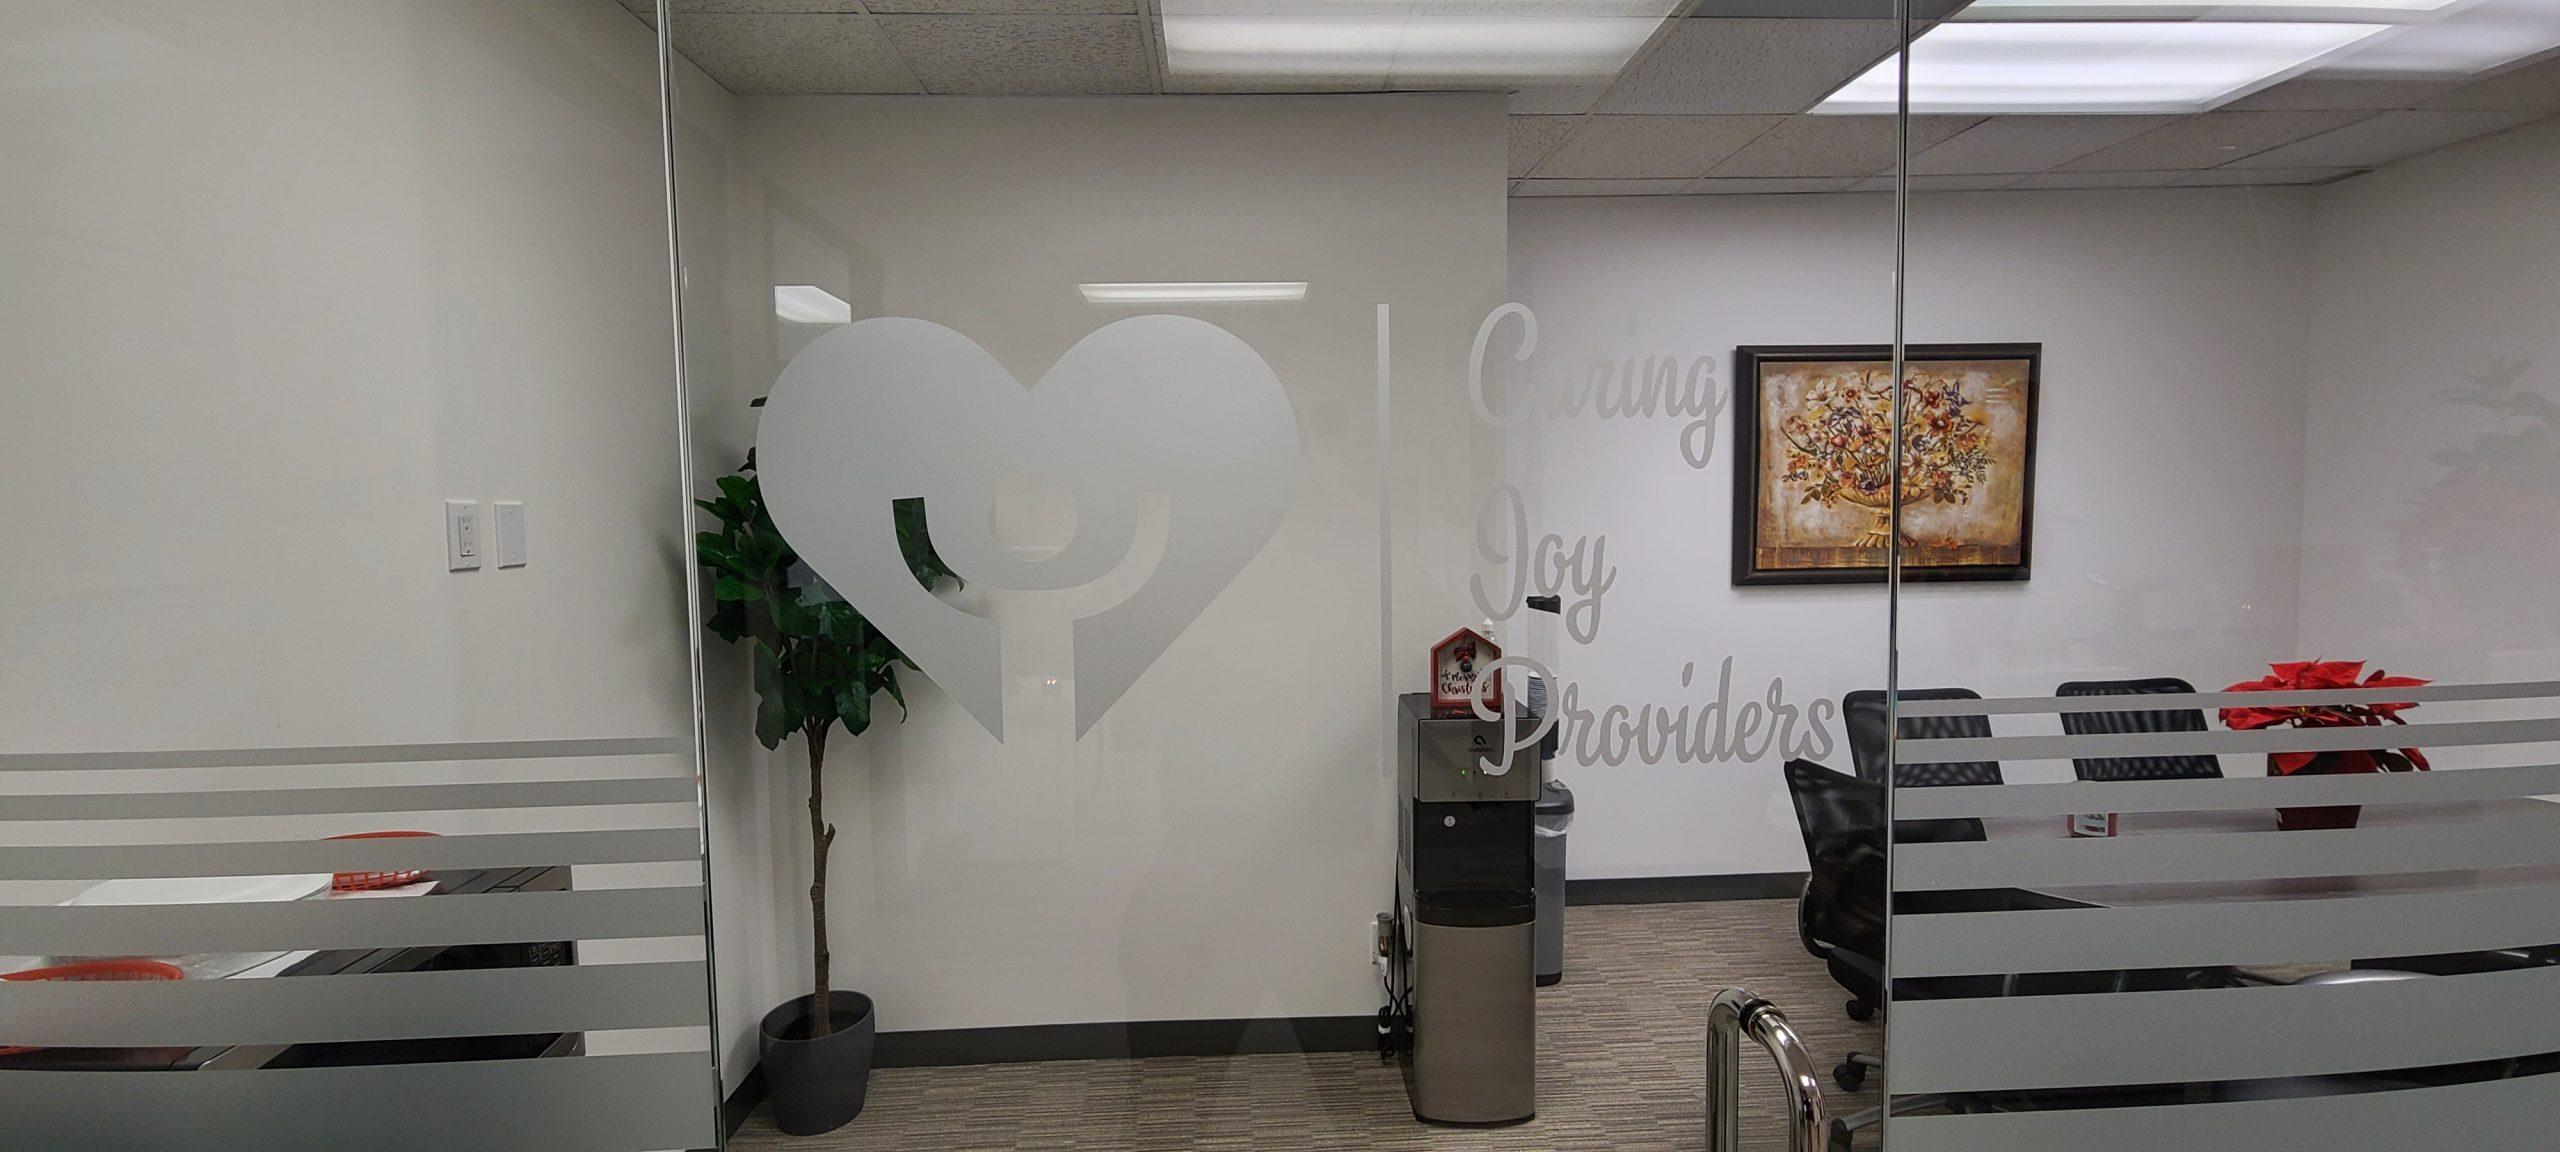 Frosted window vinyl can add to the appearance of an office and also display brand logos. Like these window graphics for Caring Joy Providers in Encino.